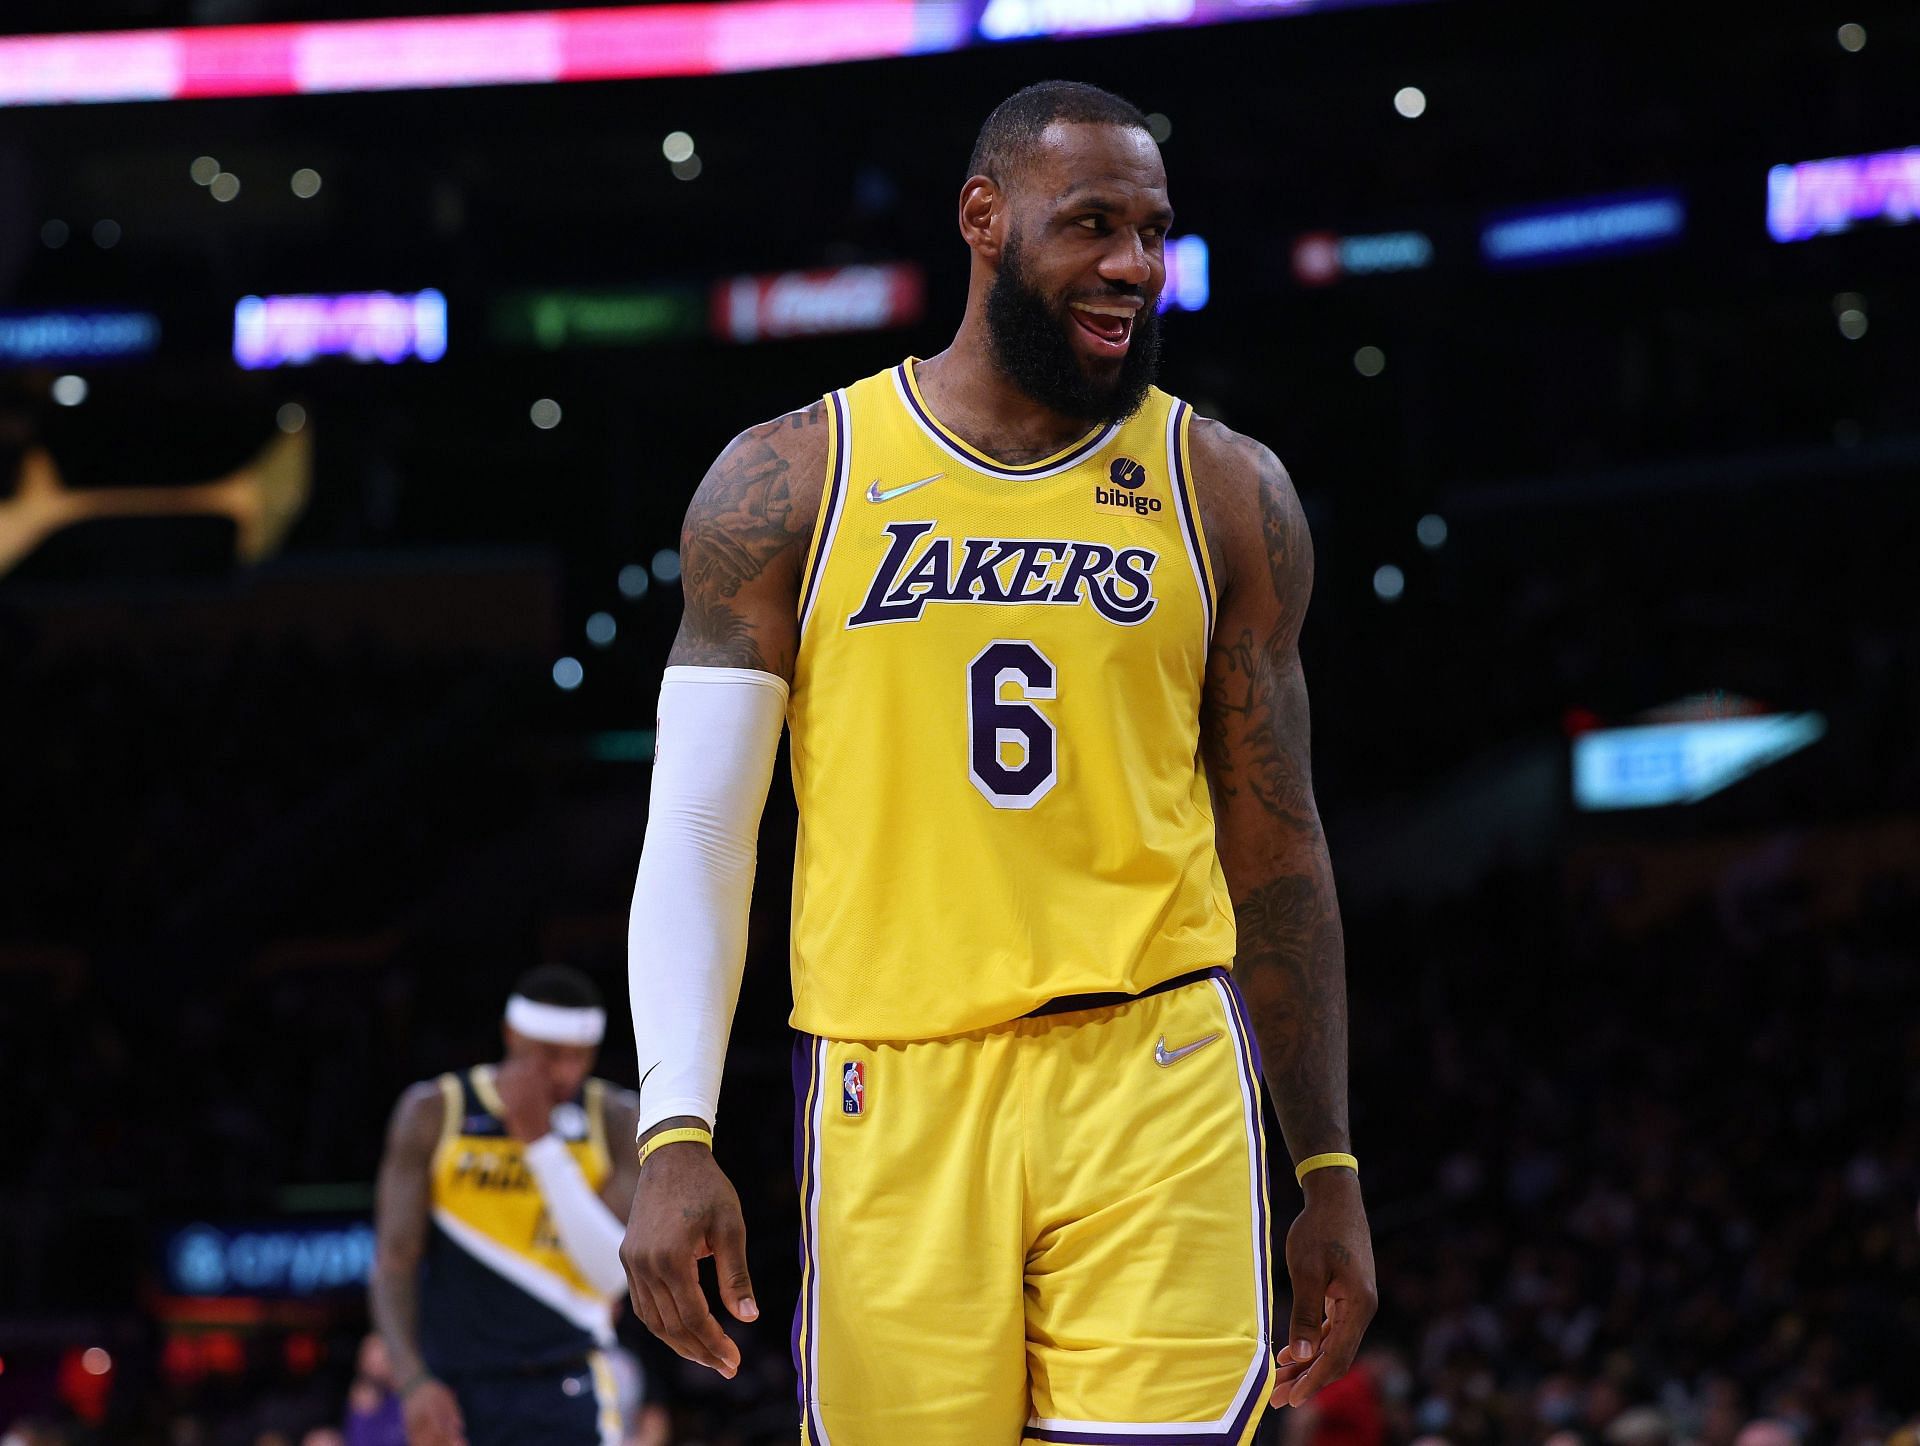 LeBron James of the LA Lakers has become the first player to bag 30K points, 10K rebounds and 9K assists.